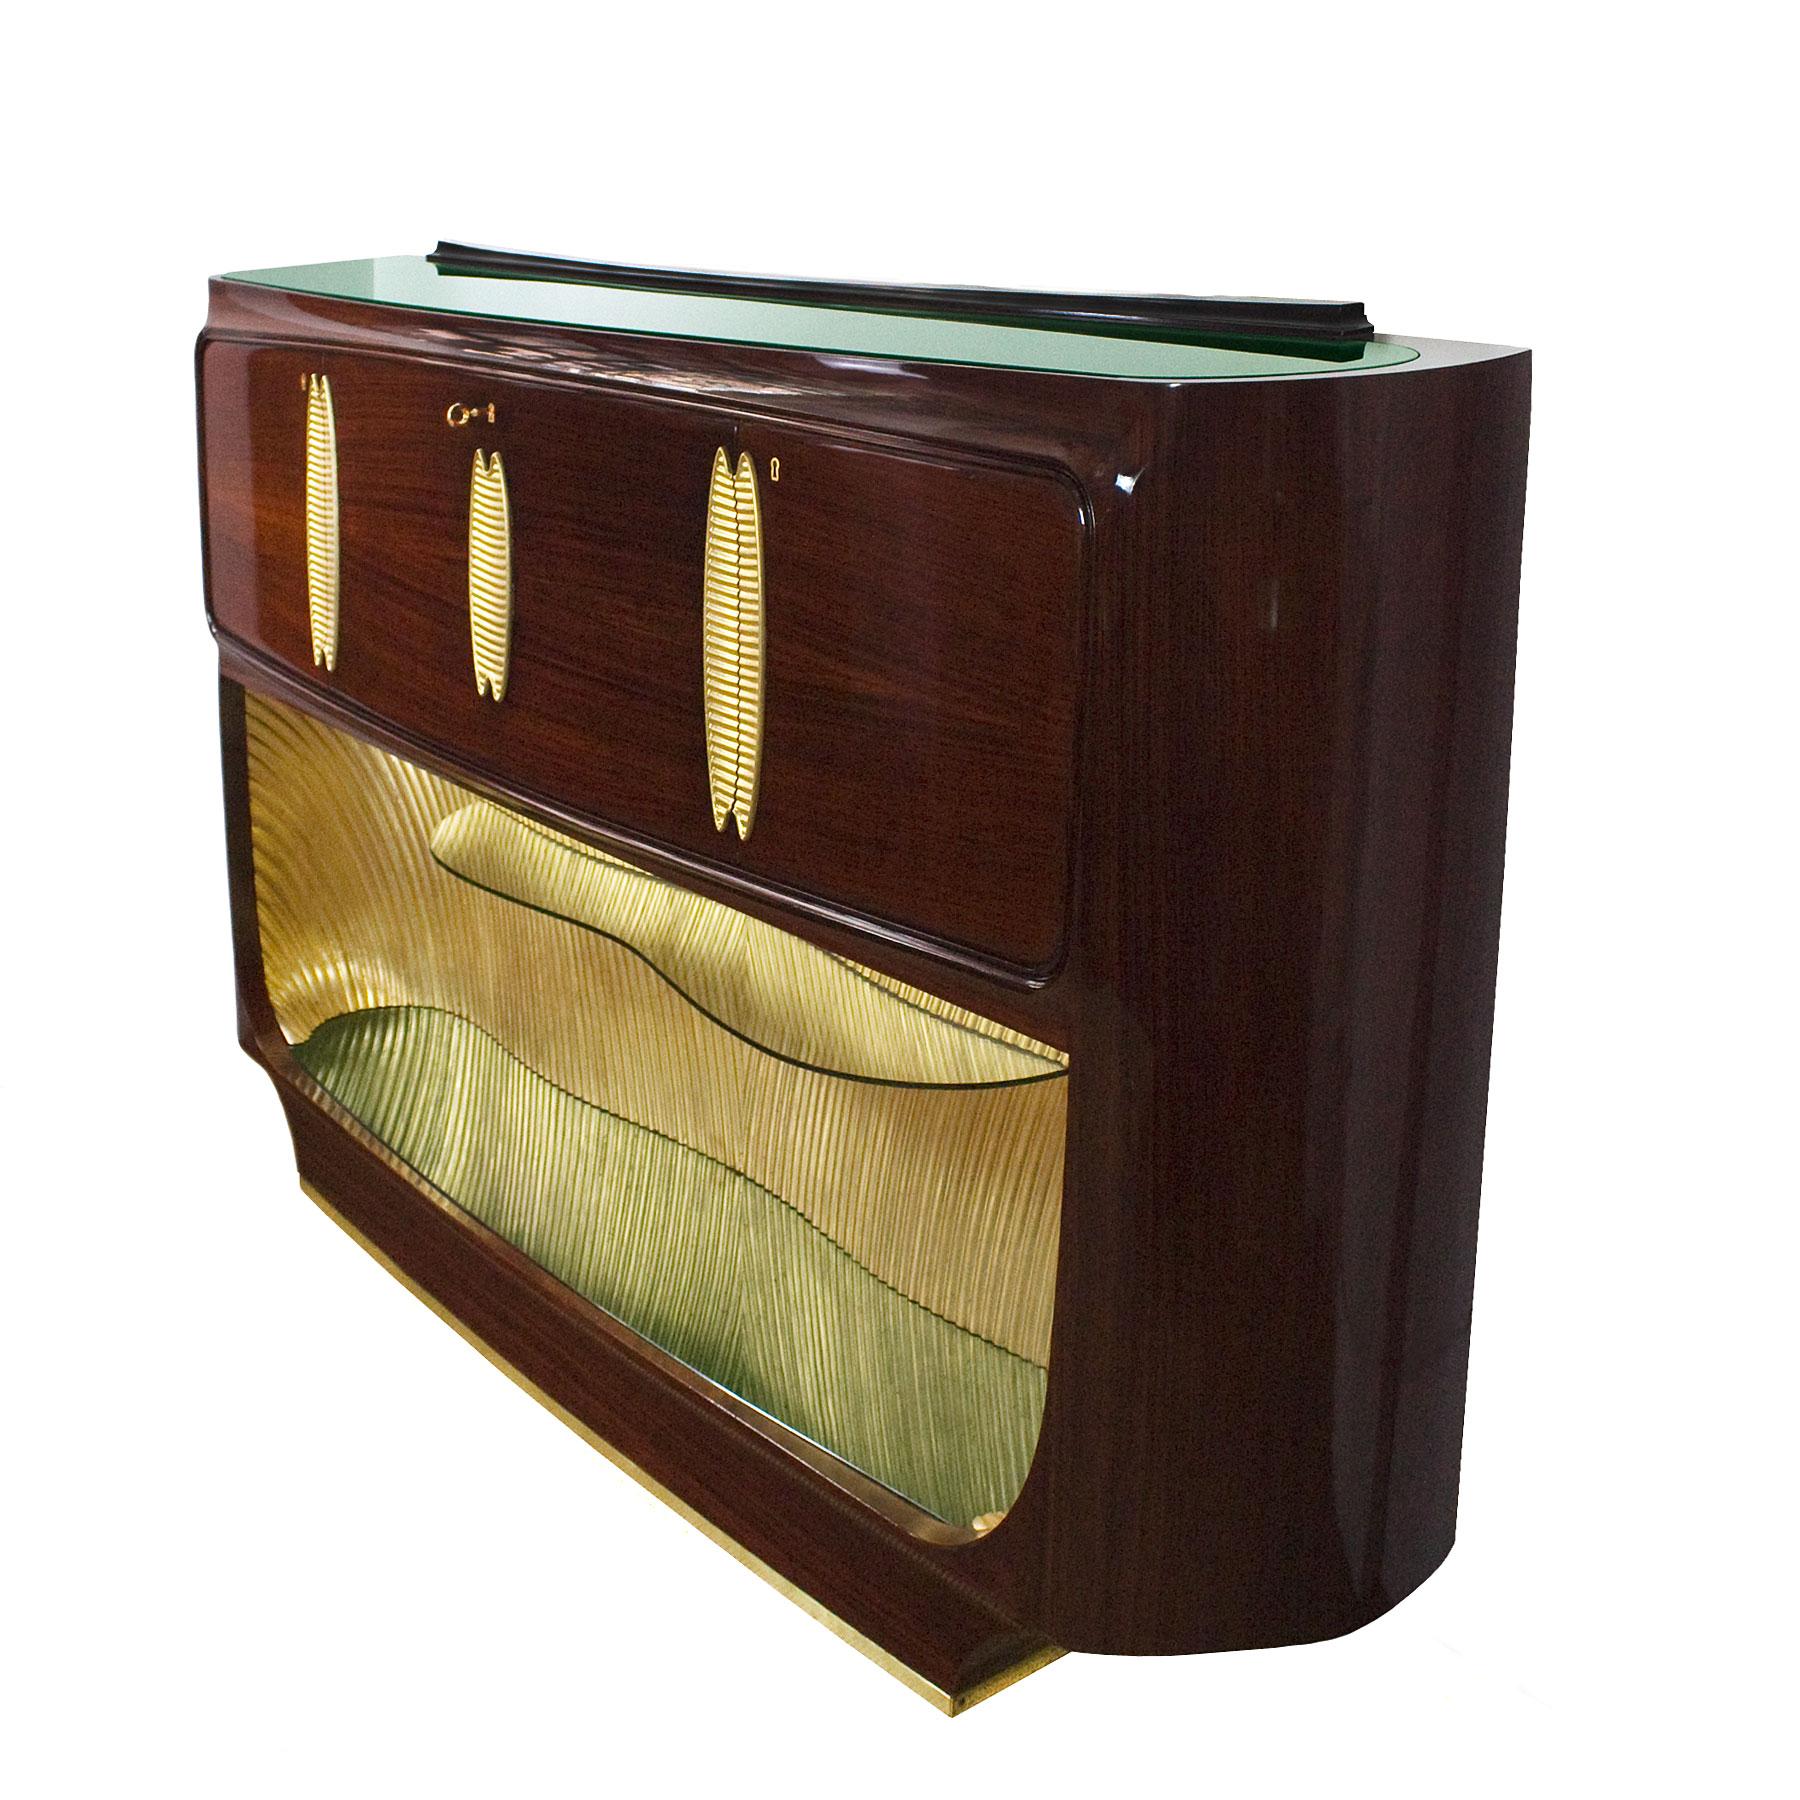 Spectacular rounded dry bar, solid wood with mahogany veneer, French polish. Gold leafing solid wood decorations on doors and at the lower part. Central door with mirrored and sycamore veneered bar. Side doors with storage spaces. Glass shelf in the